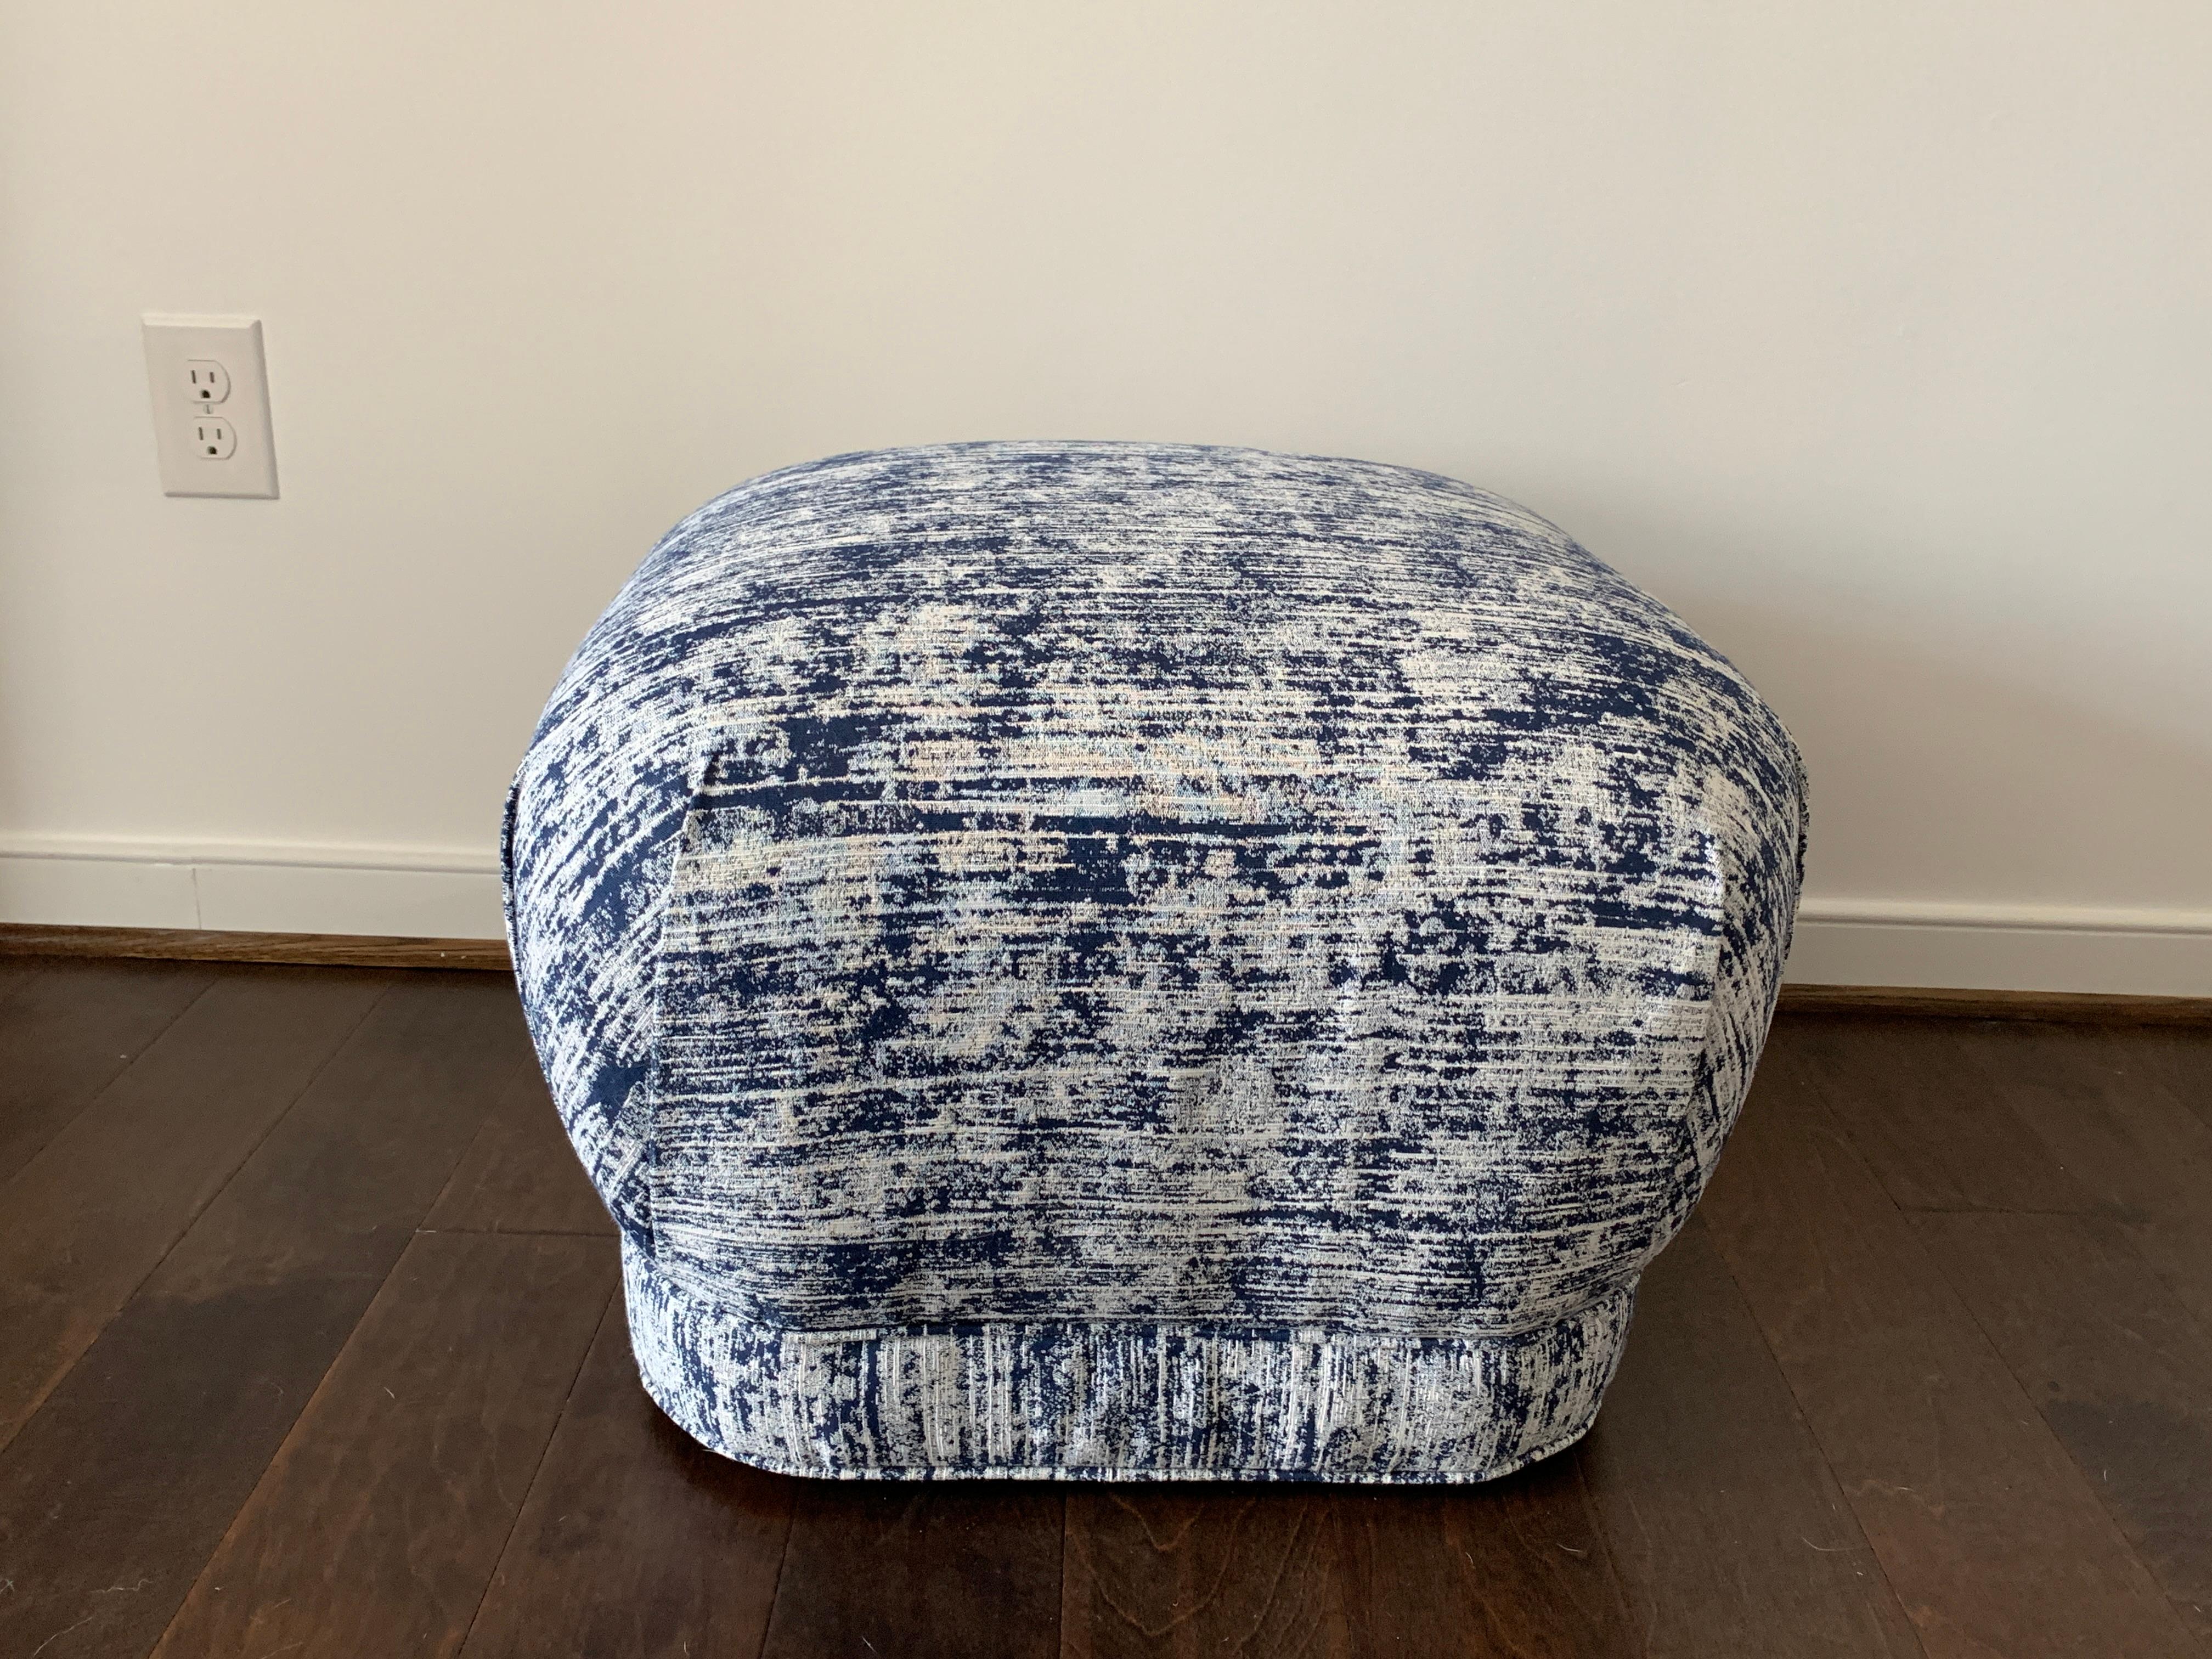 Listed is a fabulous, 1970s Karl Springer style soufflé pouf ottoman. The piece has been professionally upholstered in Scalamandré's 'Amalfi Weave' in the 'Indigo' colorway, from their 'Isola Indoor or Outdoor' collection. Self-welt and banding